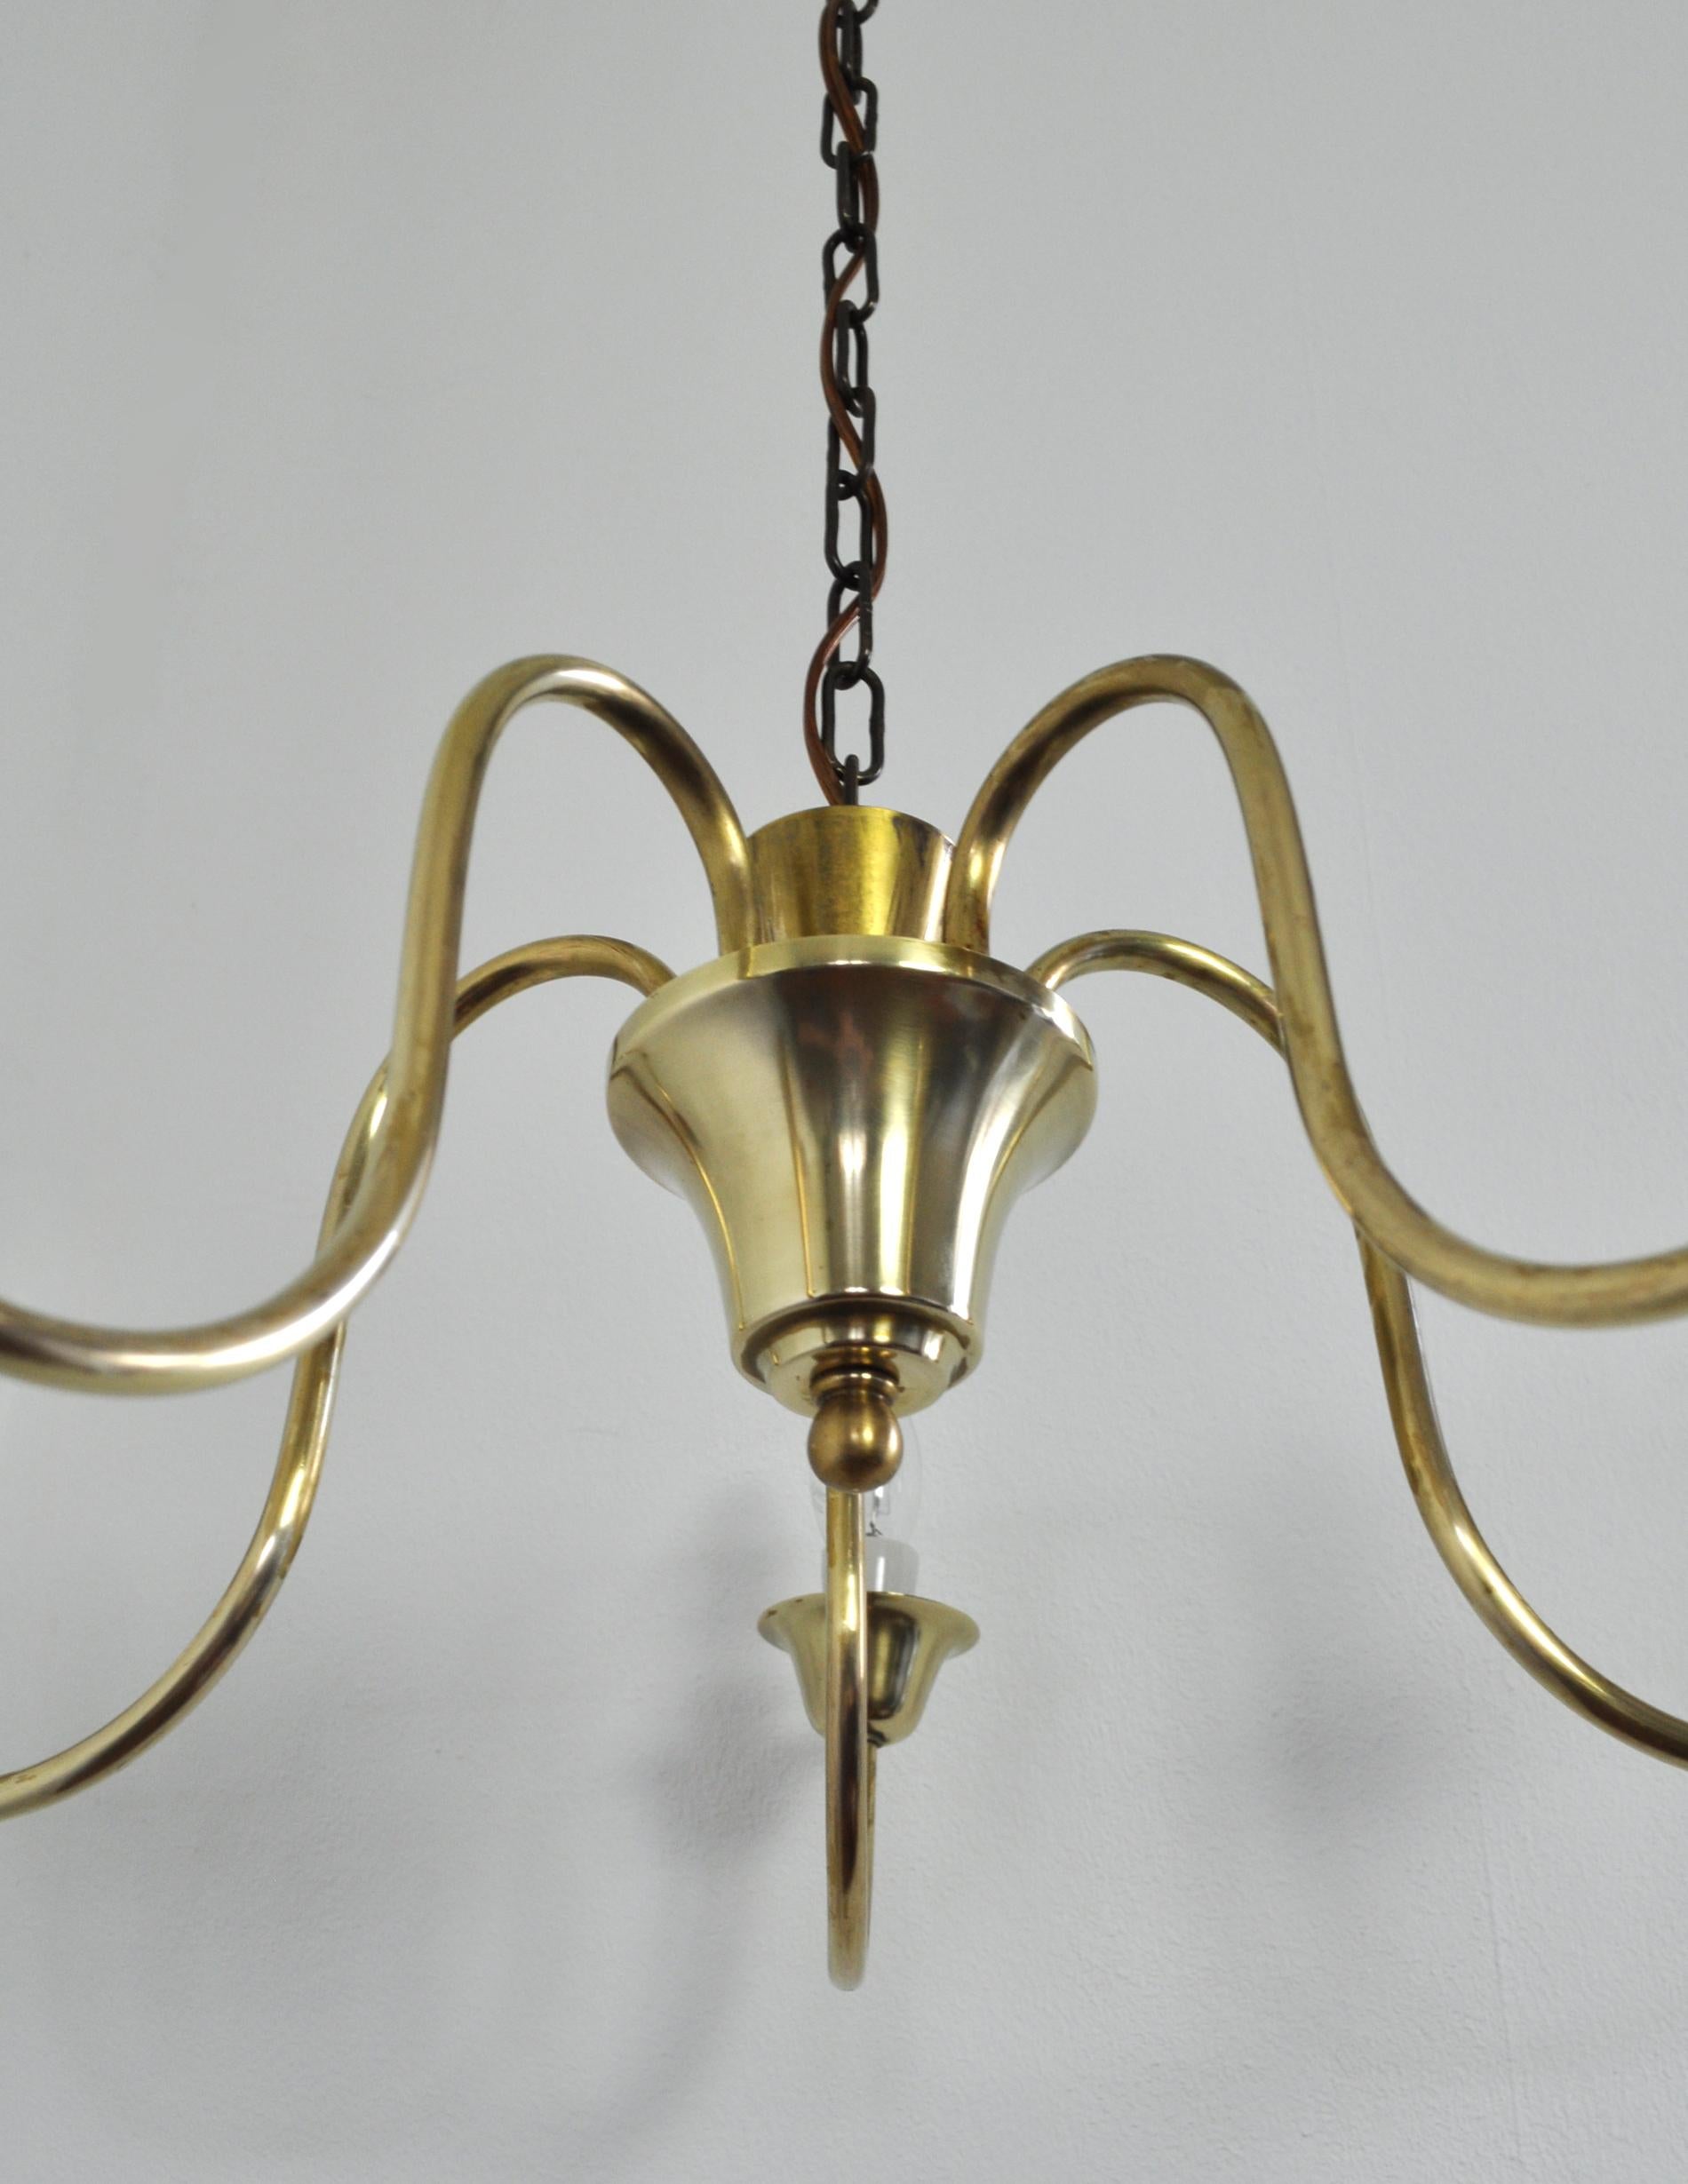 20th Century Five-Arm Solid Brass Chandelier by Fog & Mørup, 1950s For Sale